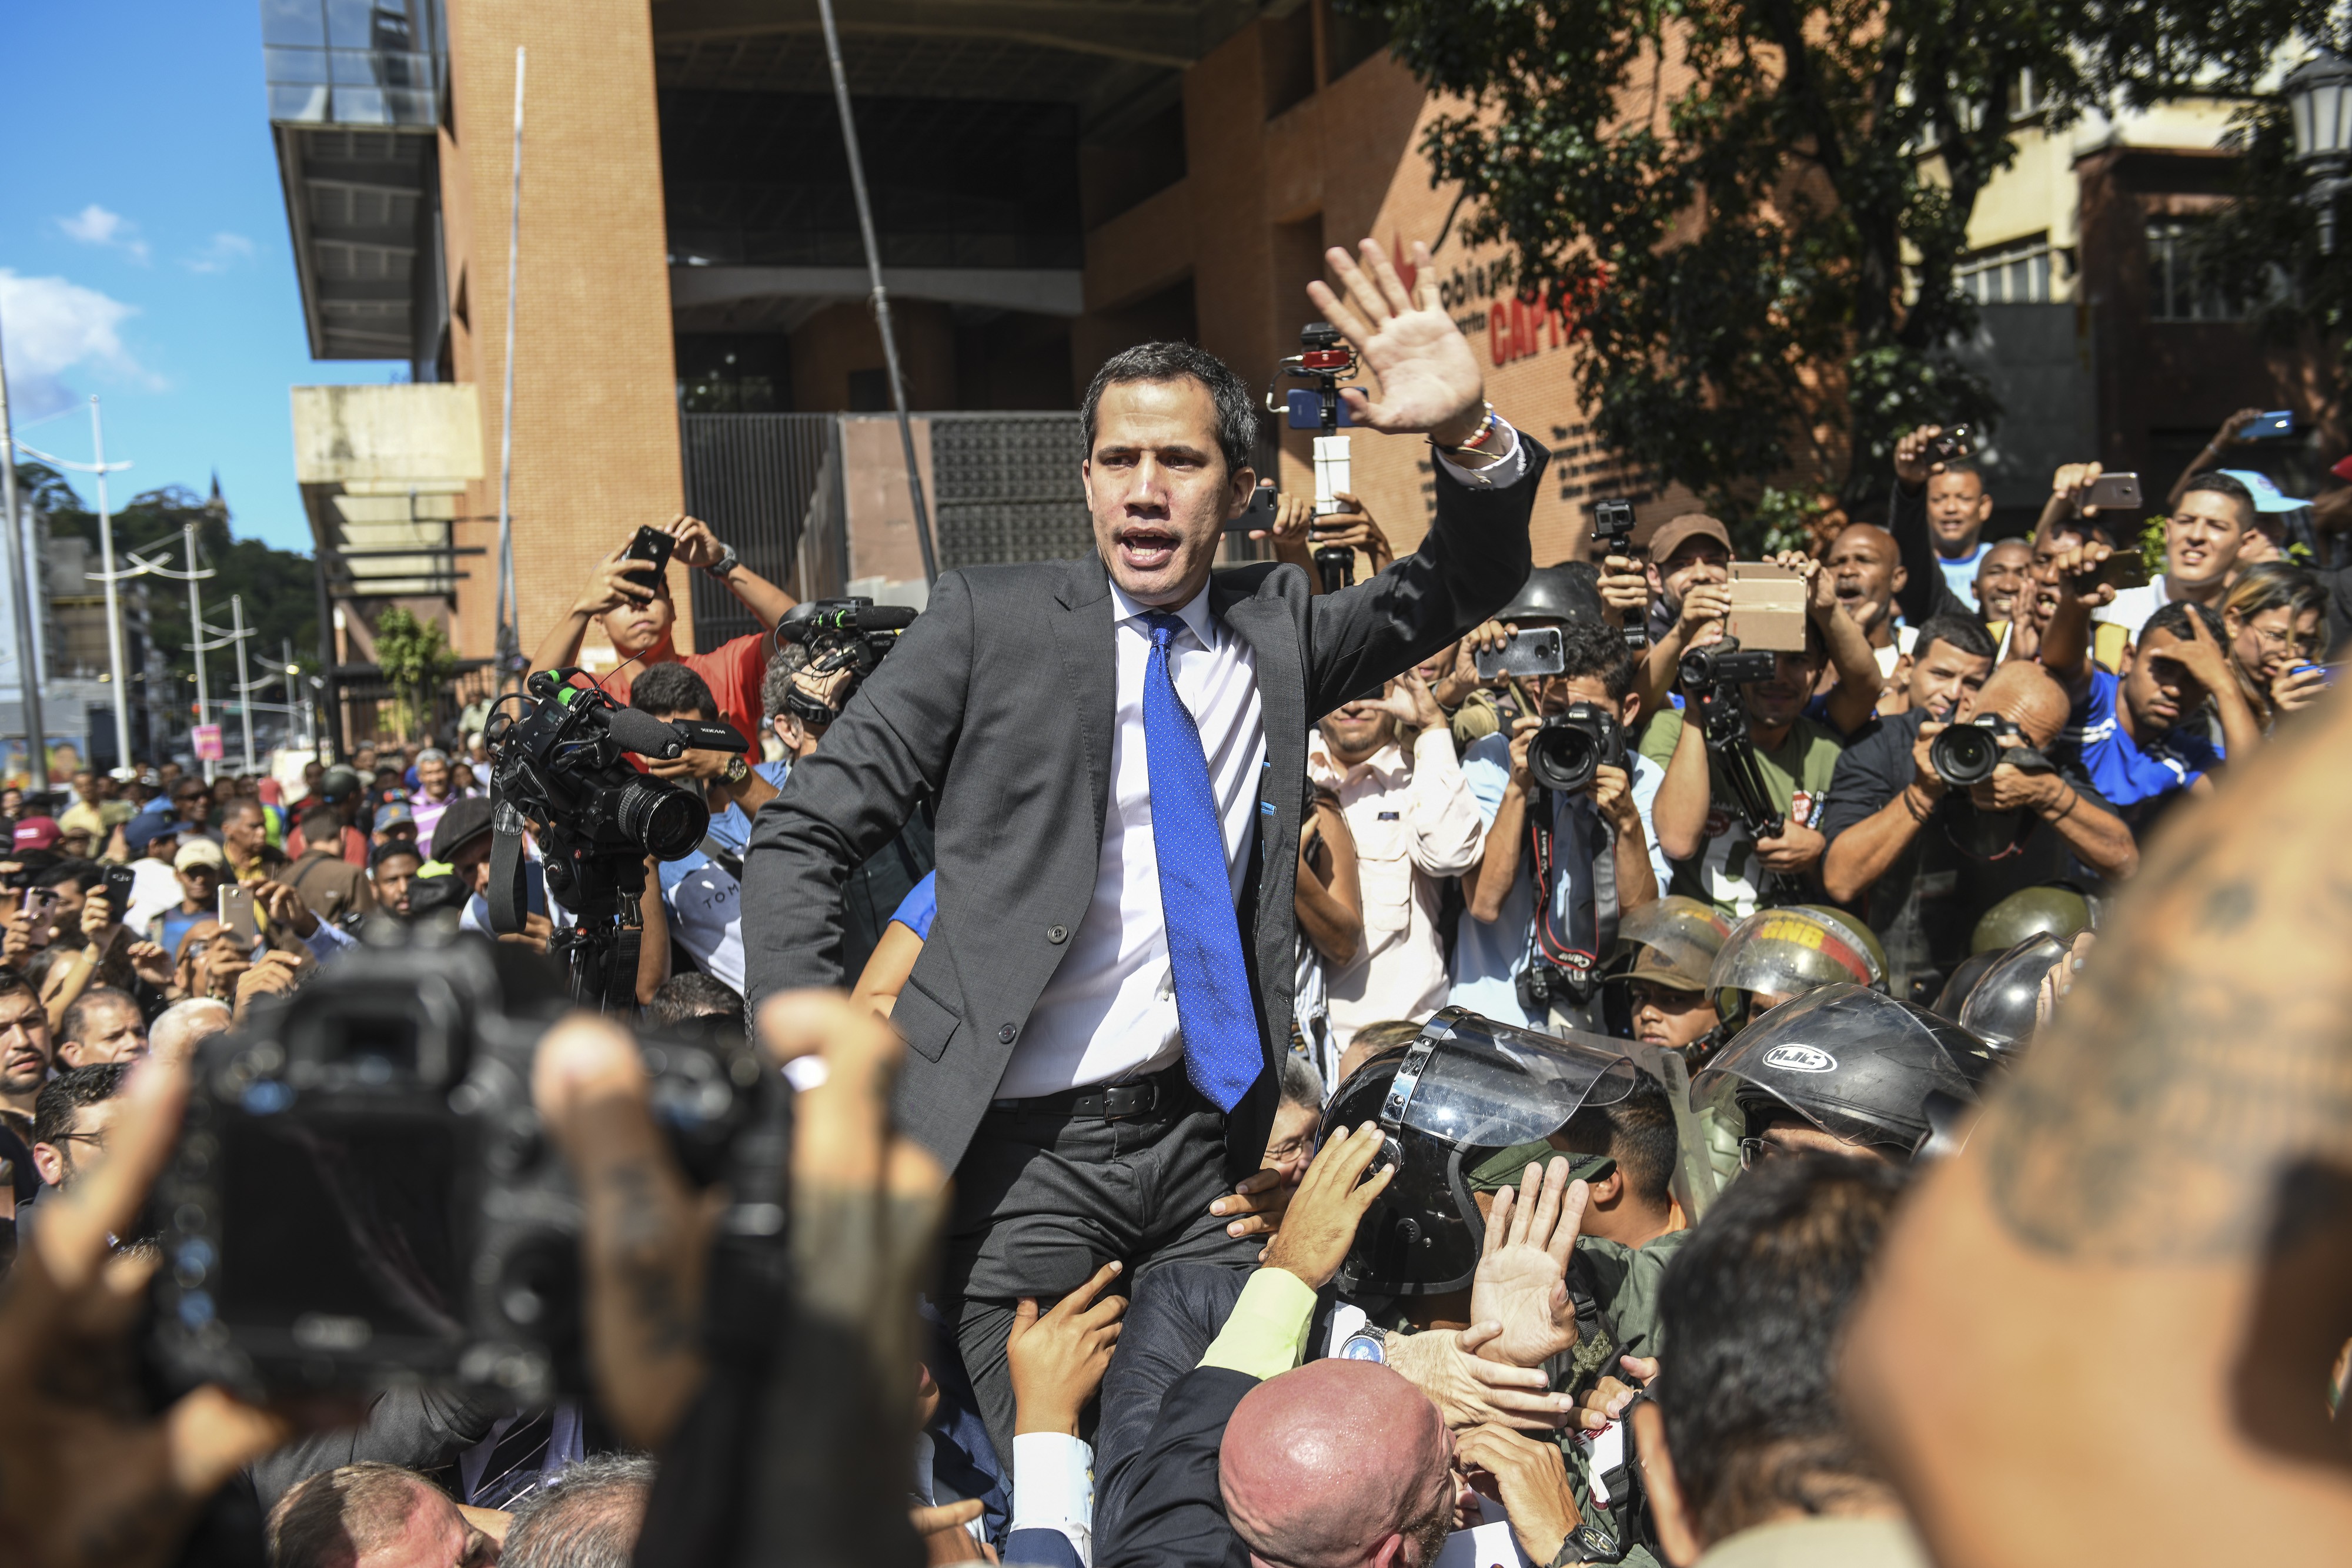 Juan Guaido gestures towards the crowd while attempting to enter the National Assembly building in Caracas, Venezuela, on Tuesday. Photo: Bloomberg